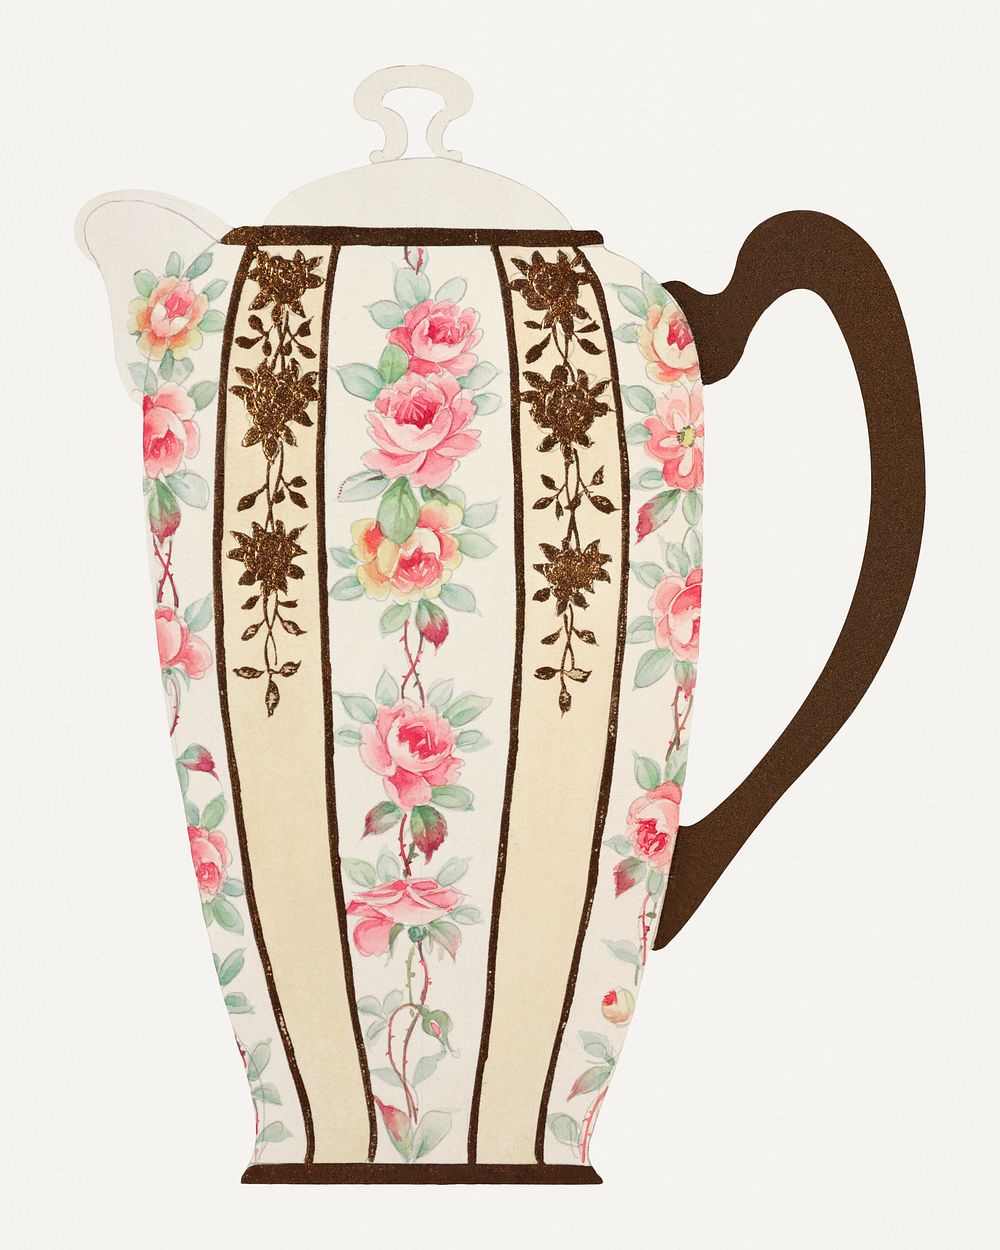 Vintage flowers and leaves jug, remixed from Noritake factory china porcelain tableware design